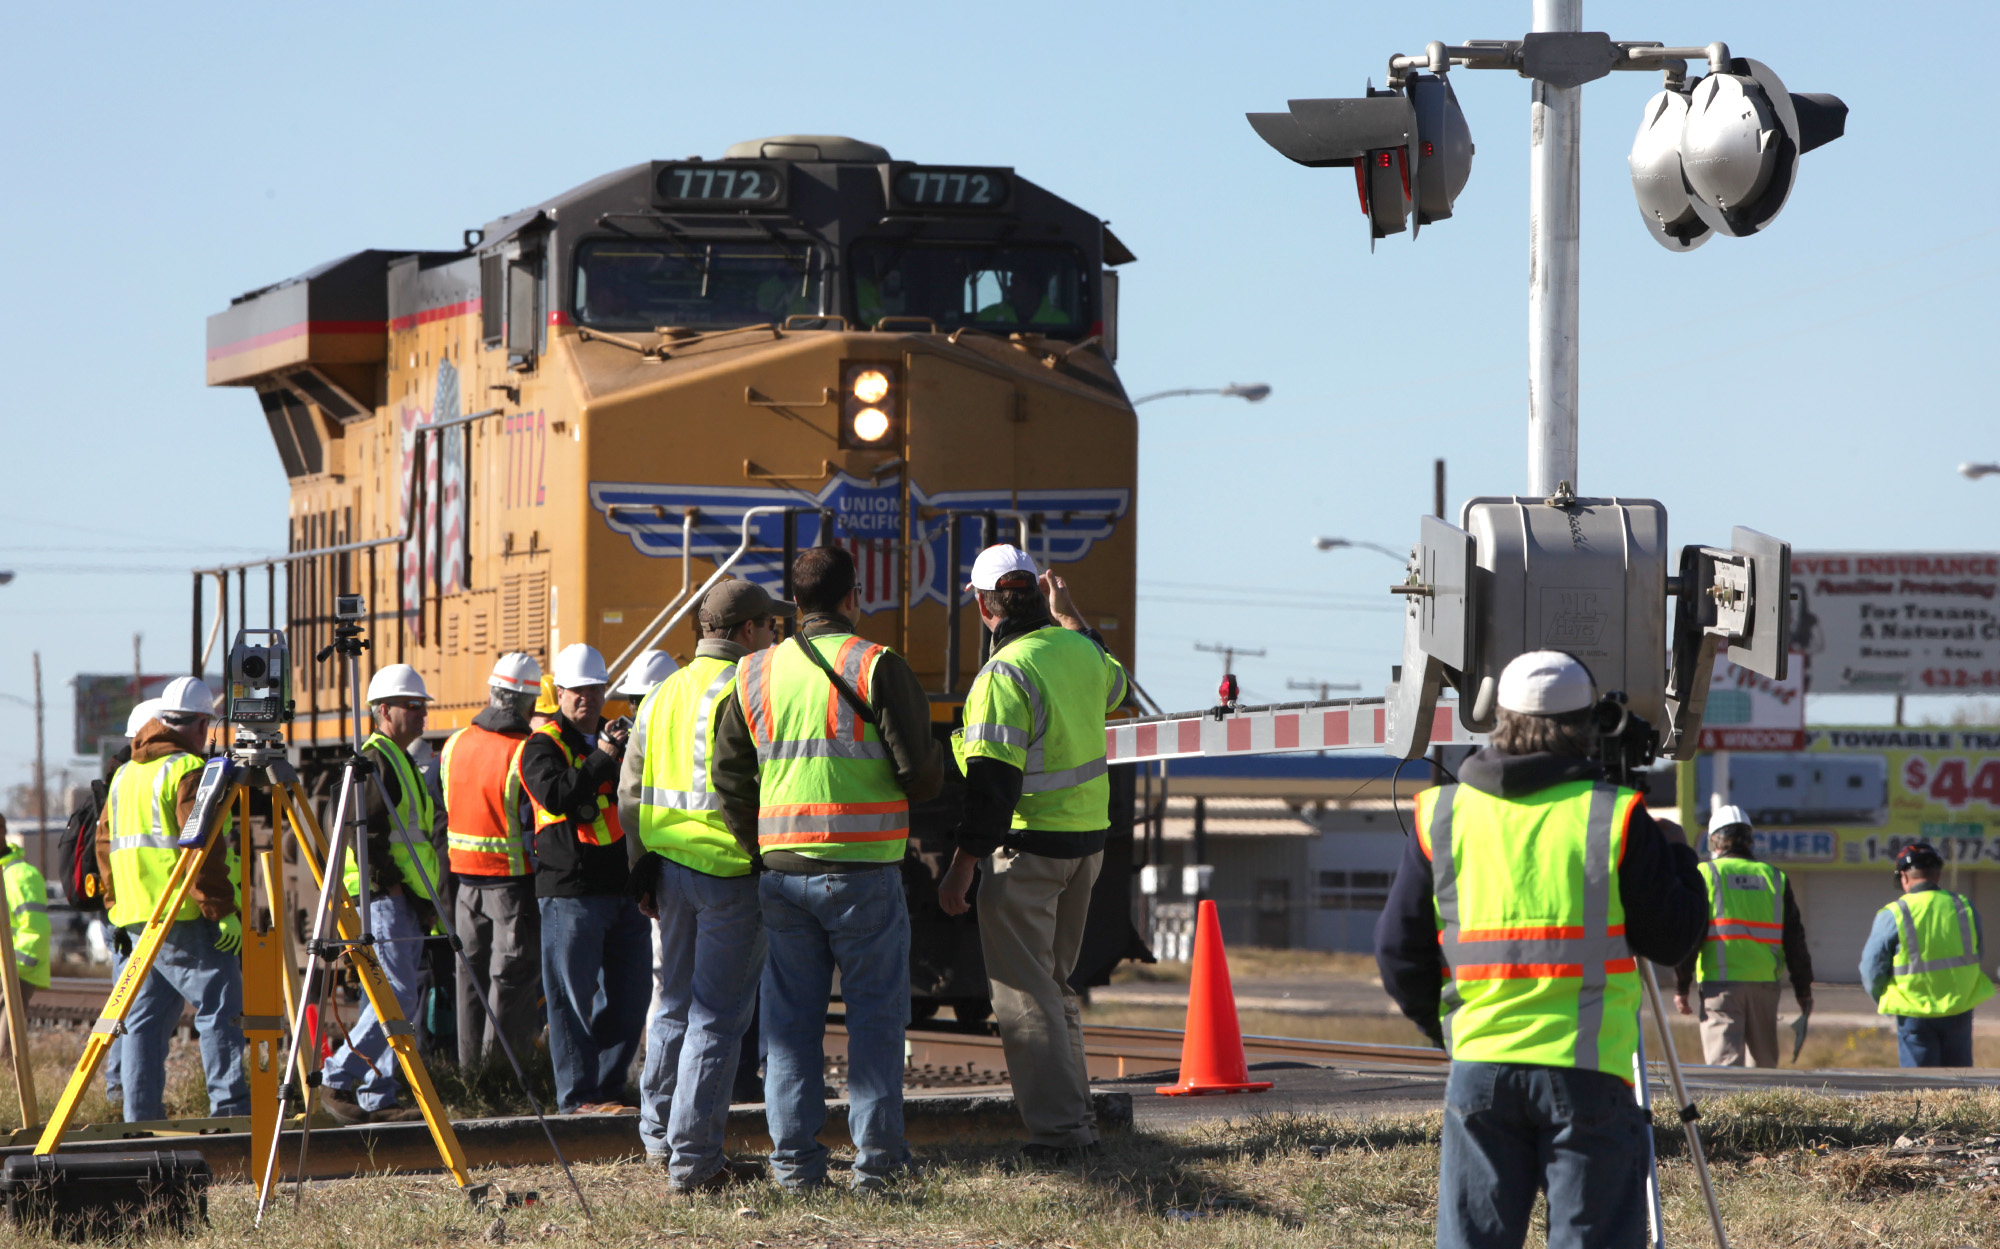 Union Pacific to work on system at site of fatal Midland crash